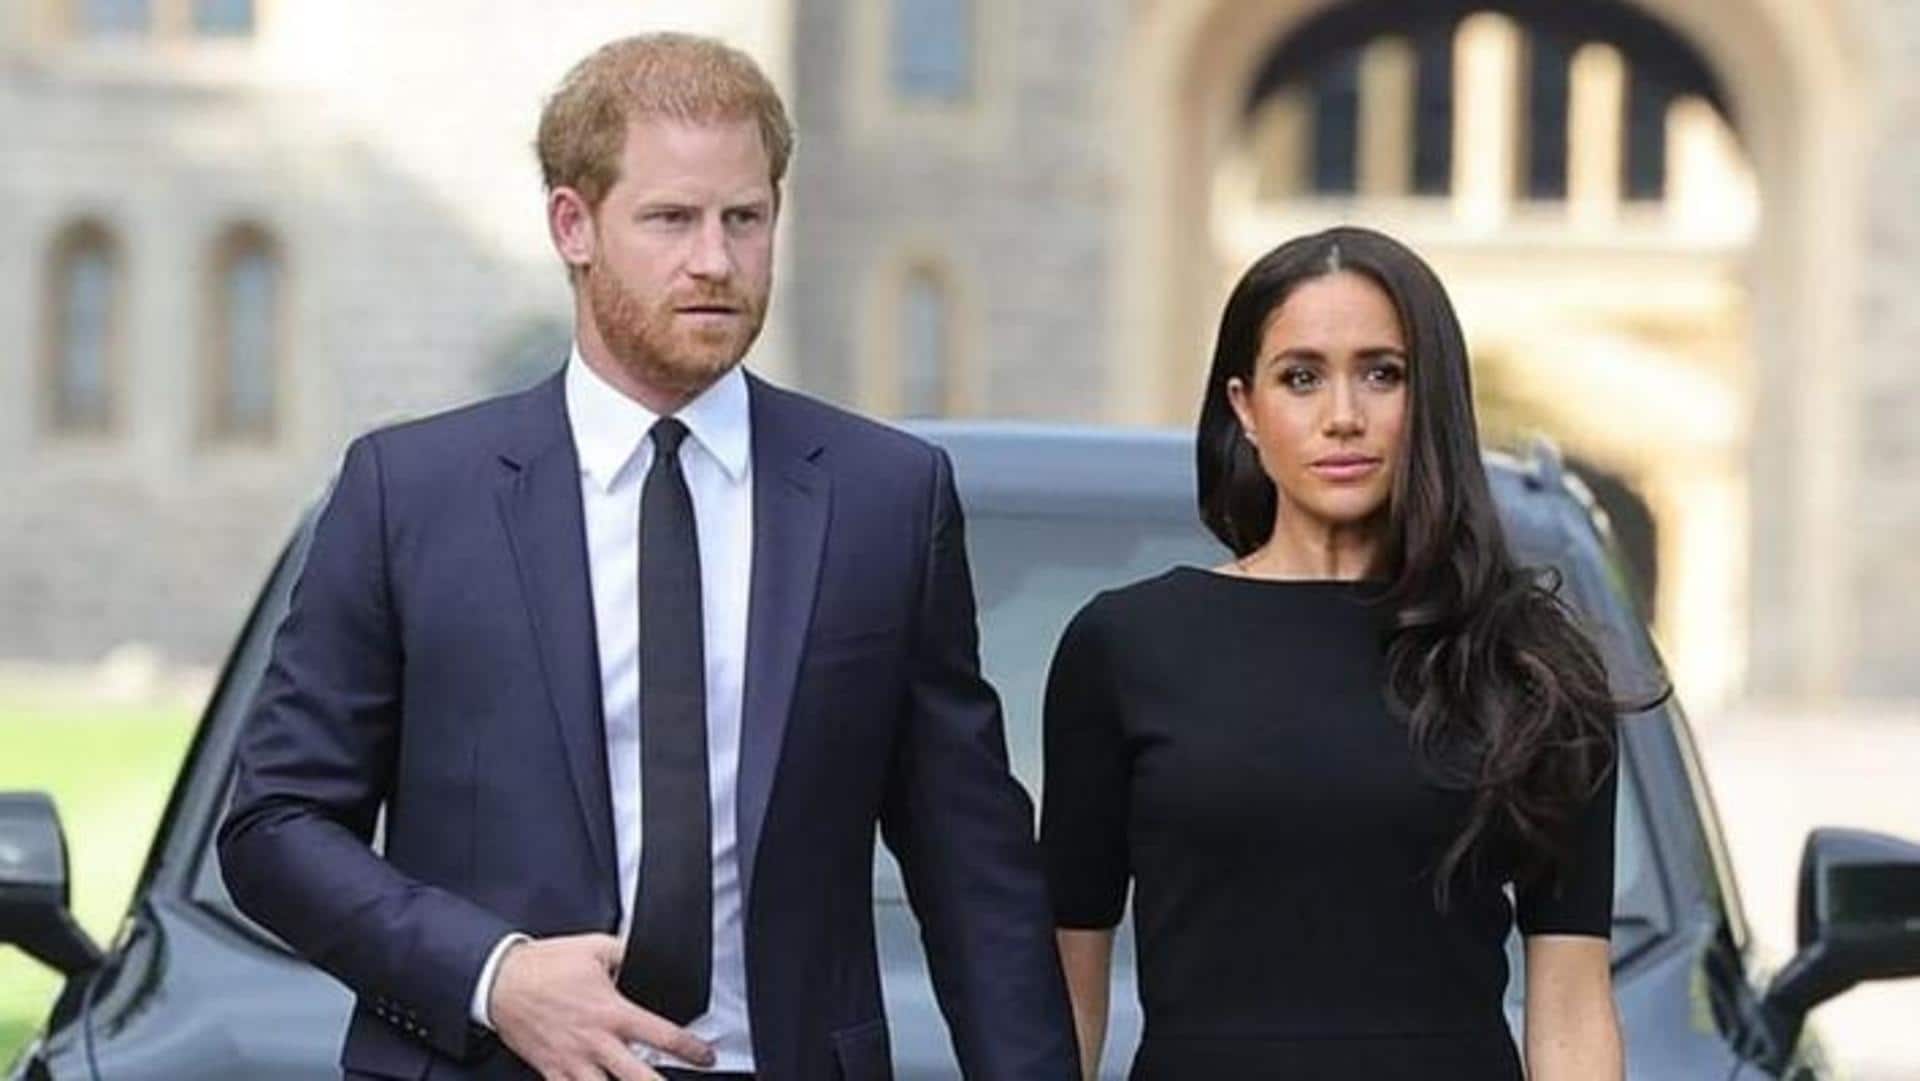 King Charles evicts Prince Harry, Meghan from UK home: Report